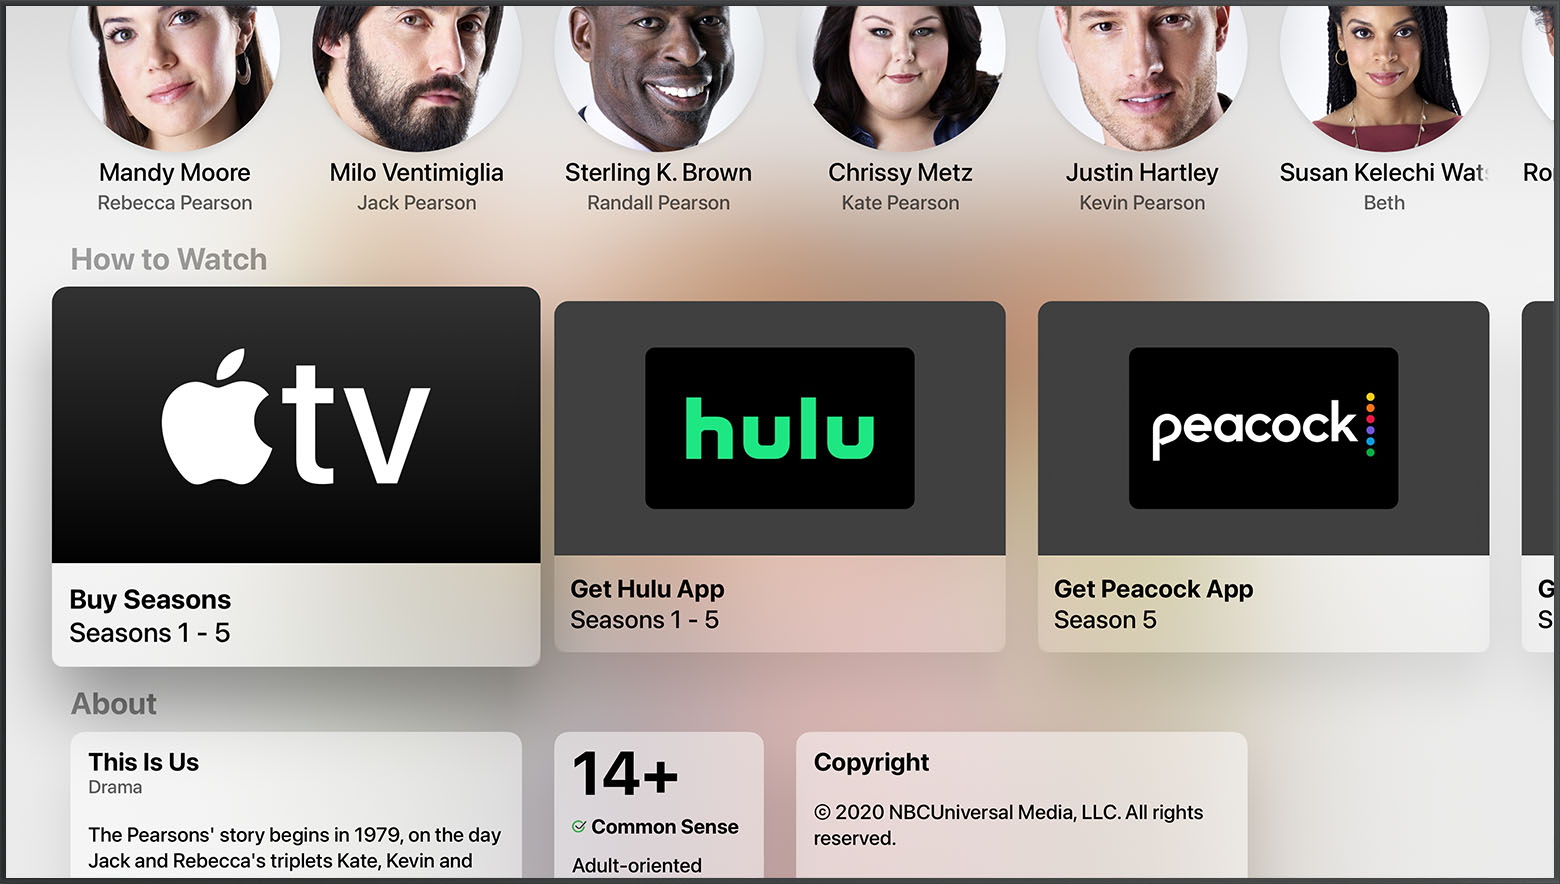 How to Watch on Apple TV, smart TV, or streaming device